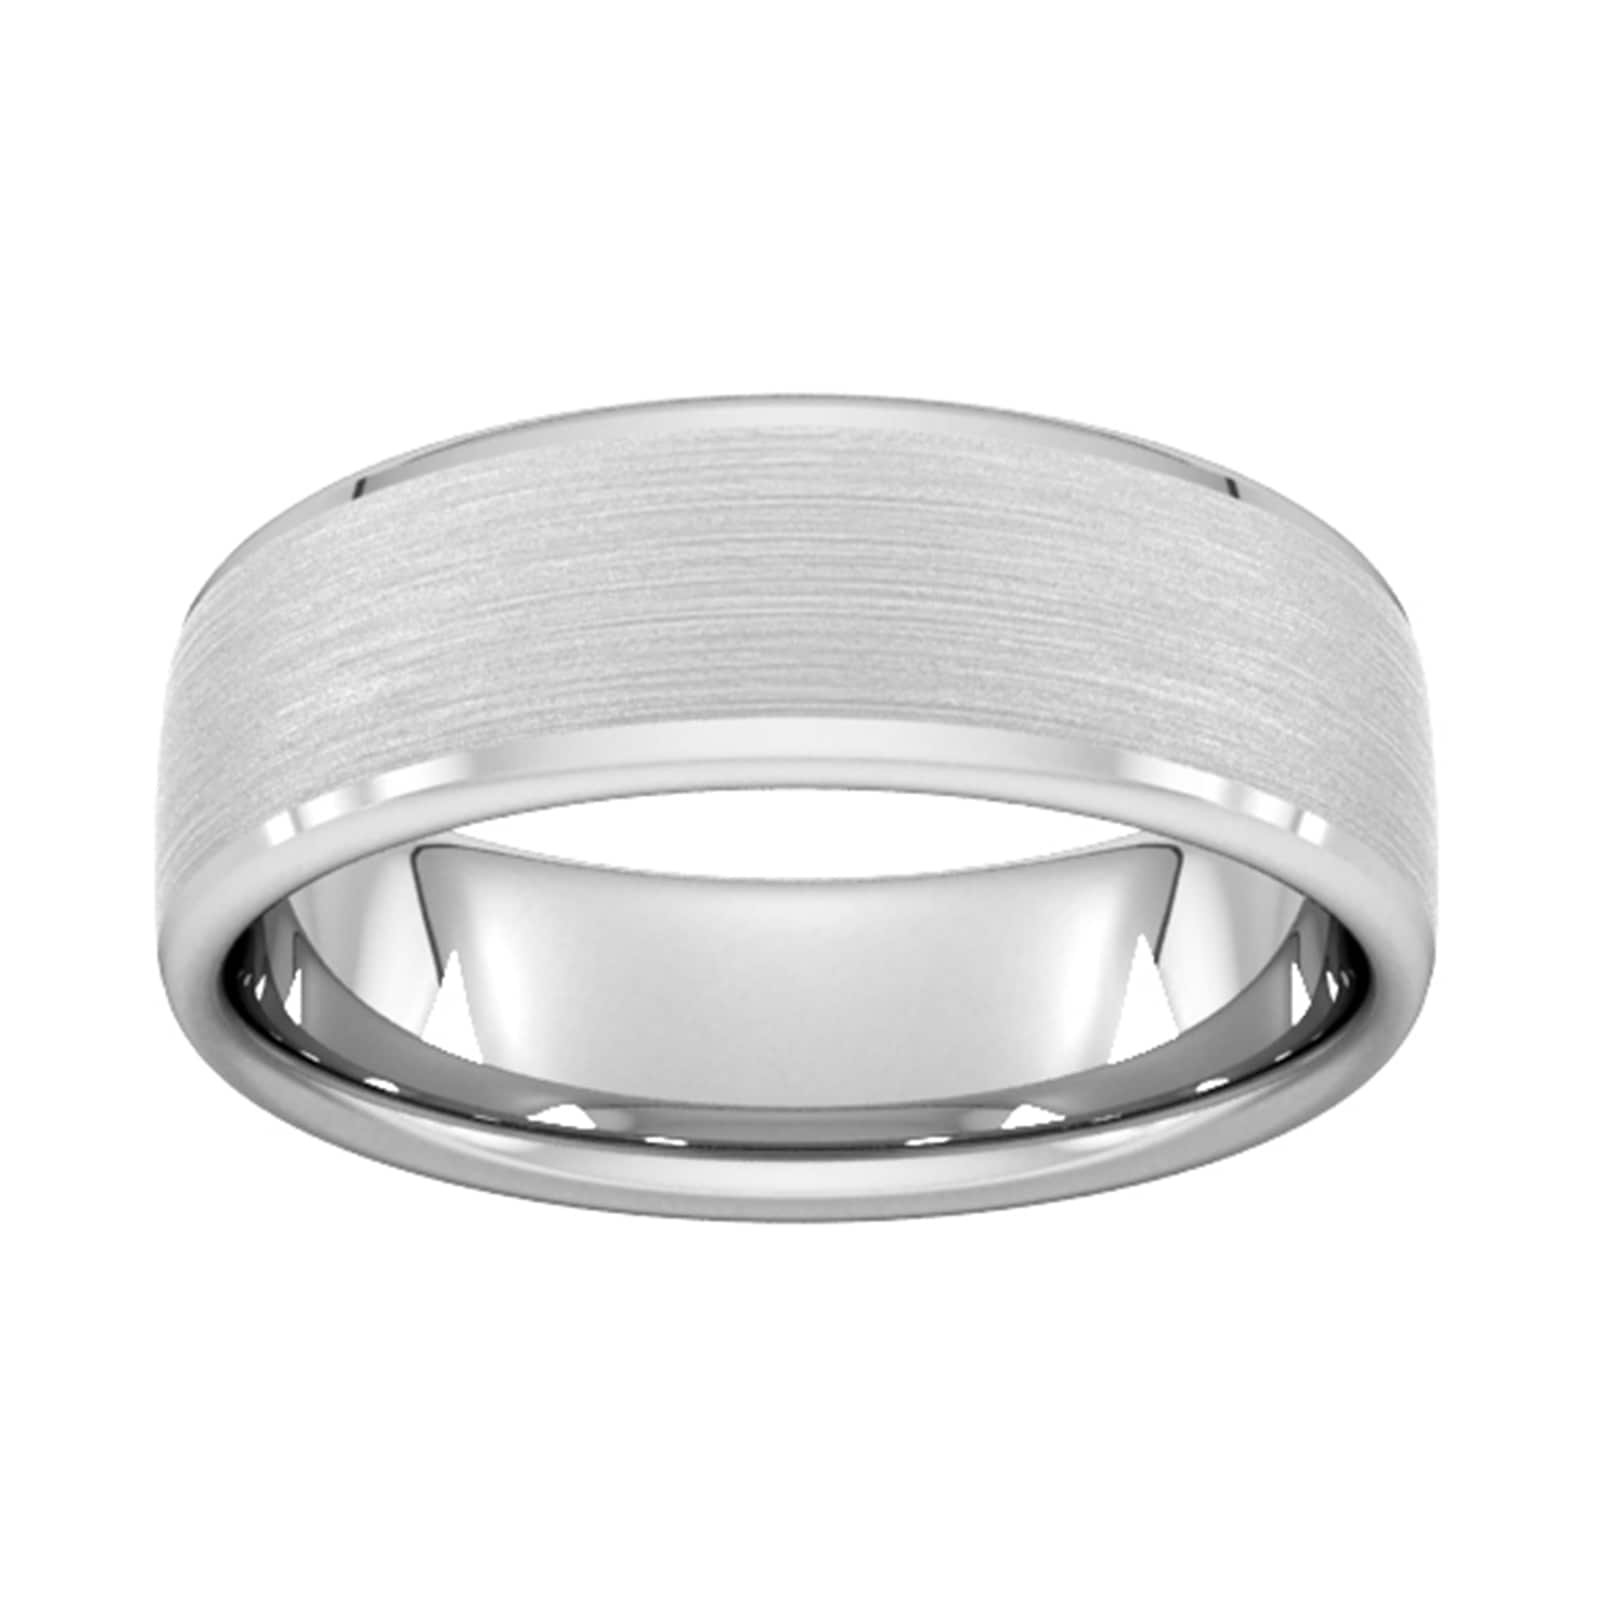 7mm Slight Court Standard Polished Chamfered Edges With Matt Centre Wedding Ring In 950 Palladium - Ring Size O